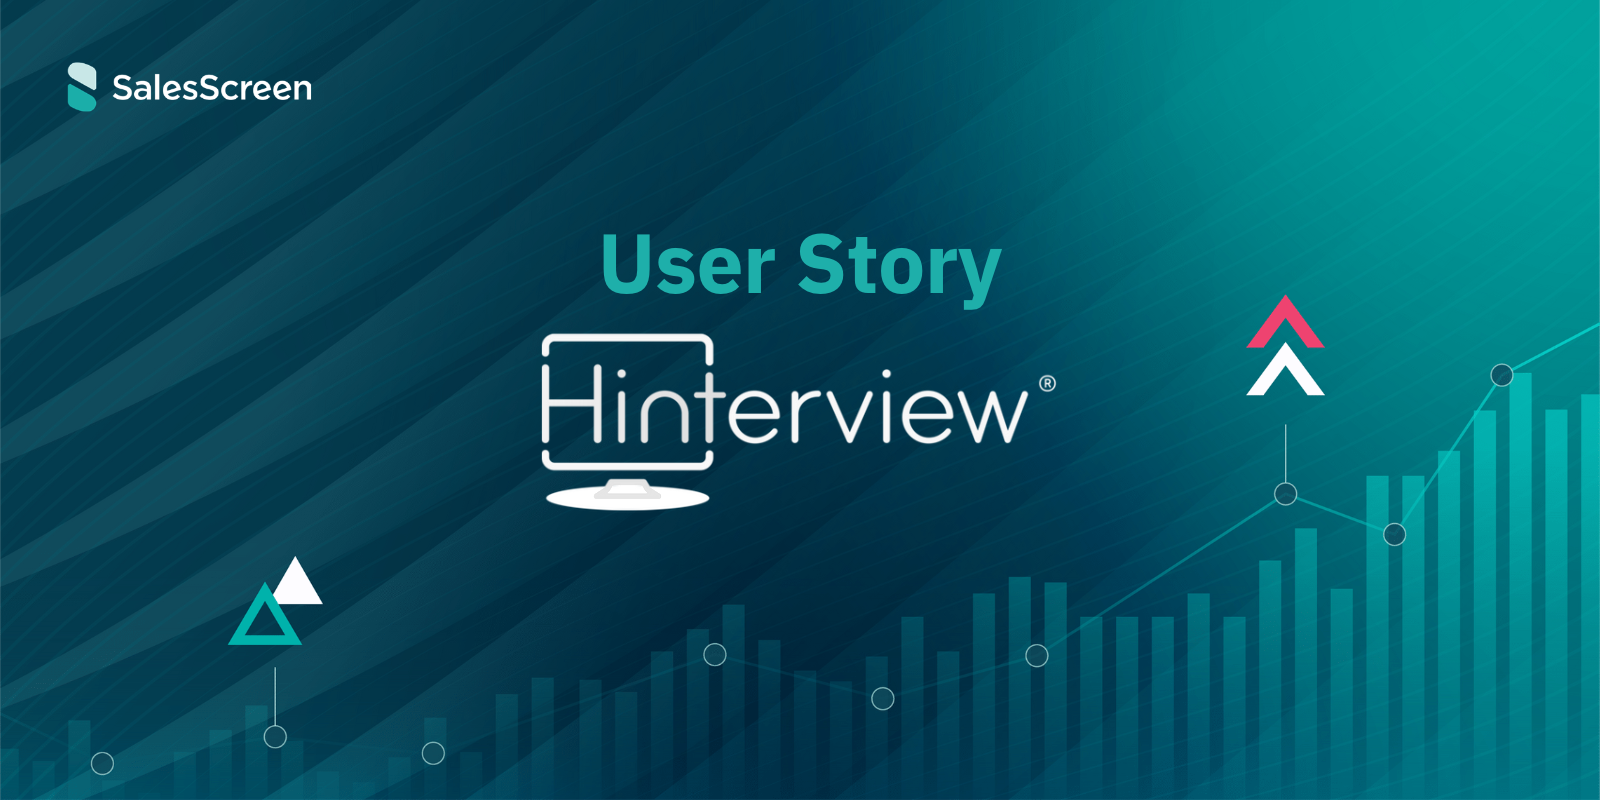 Hinterview - User Story